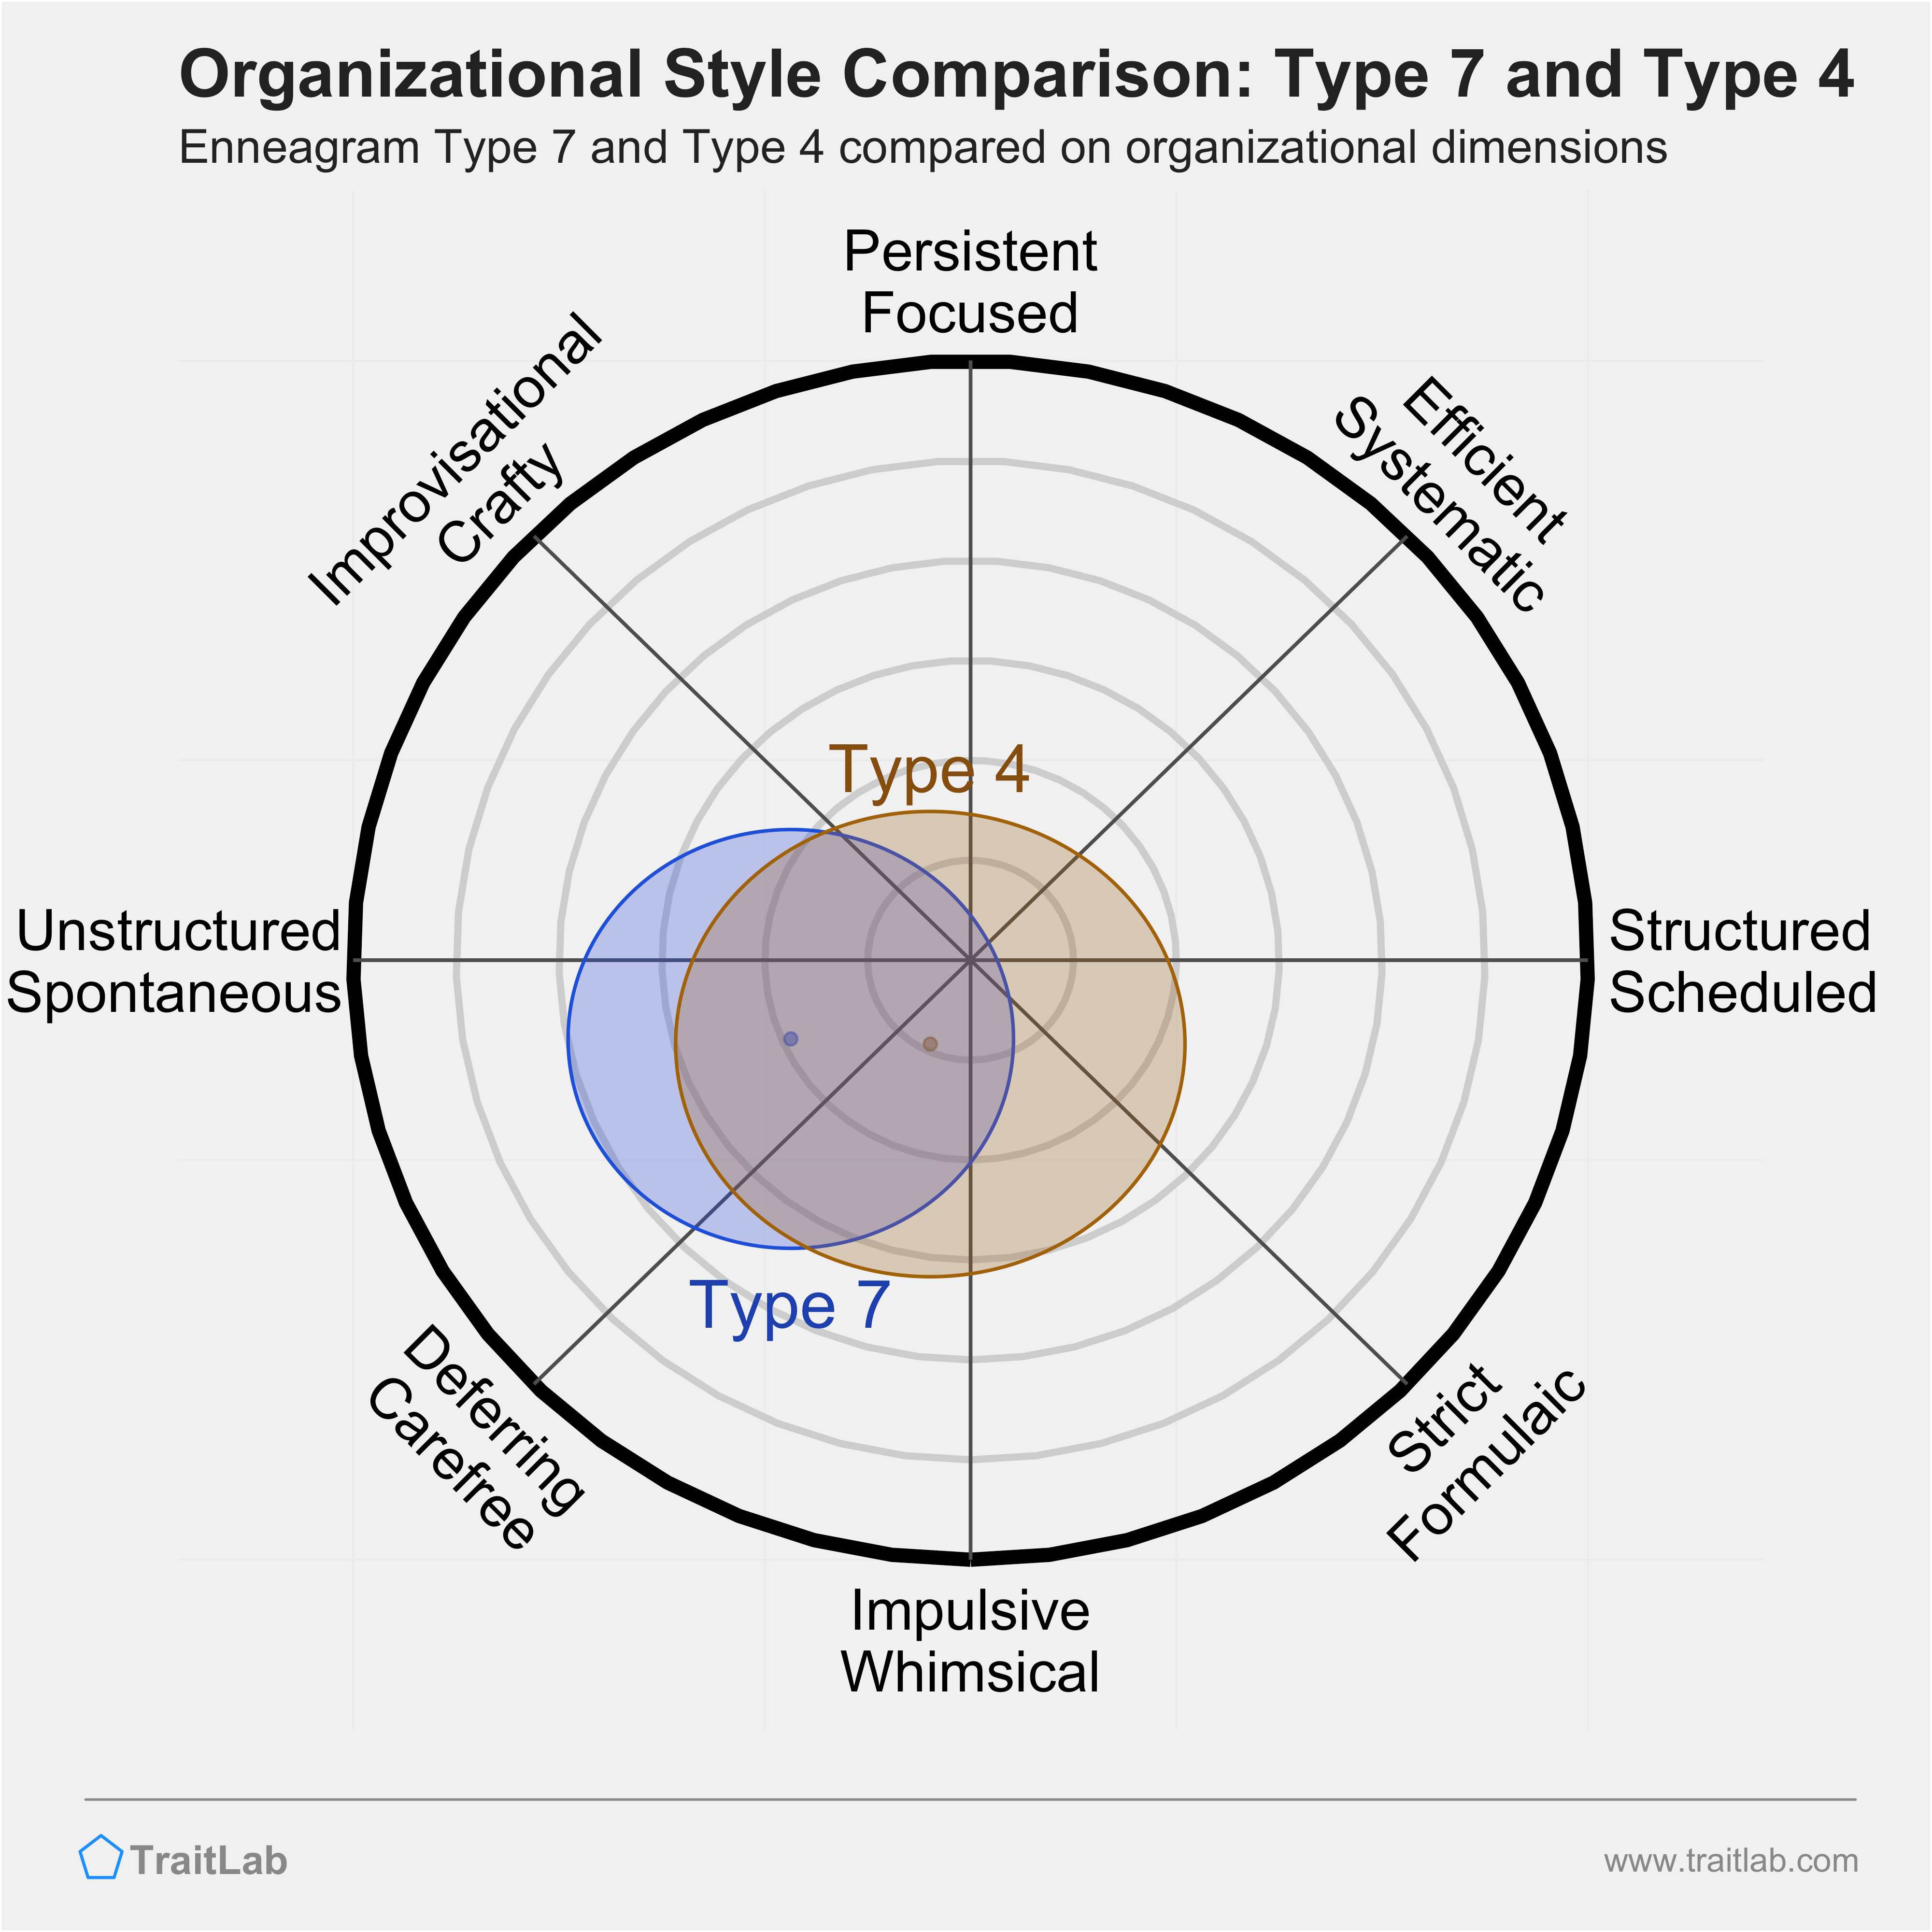 Type 7 and Type 4 comparison across organizational dimensions